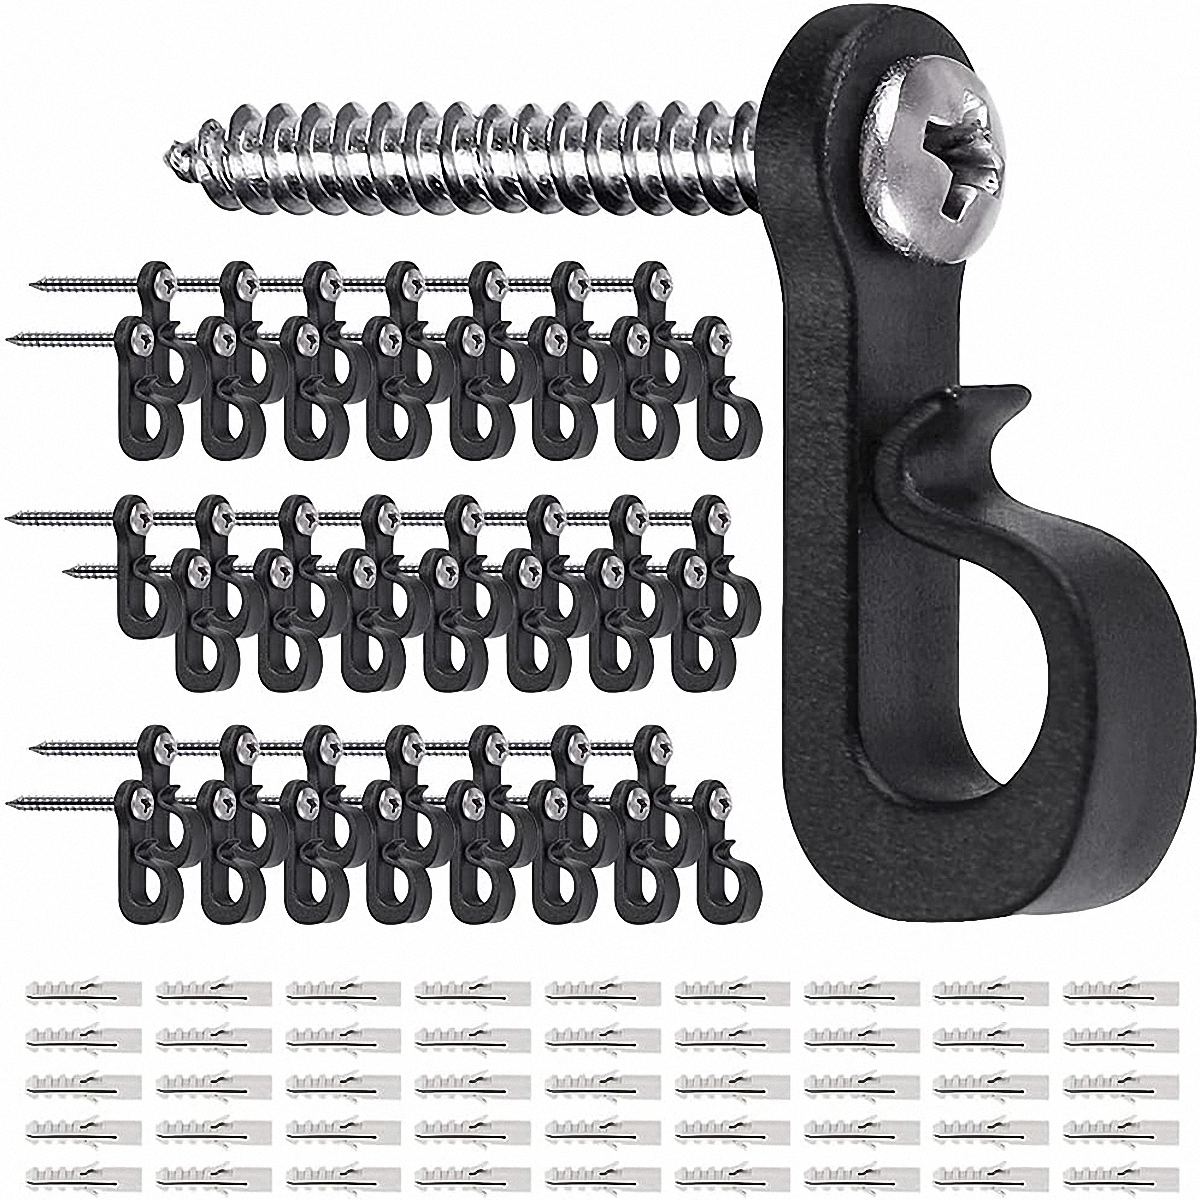 Ceiling Hooks With Safety Buckle, Screw Hooks For Hanging Plants & Outdoor  String Lights, Wall Hangers & Light Hangers For Party And Festival Decorati